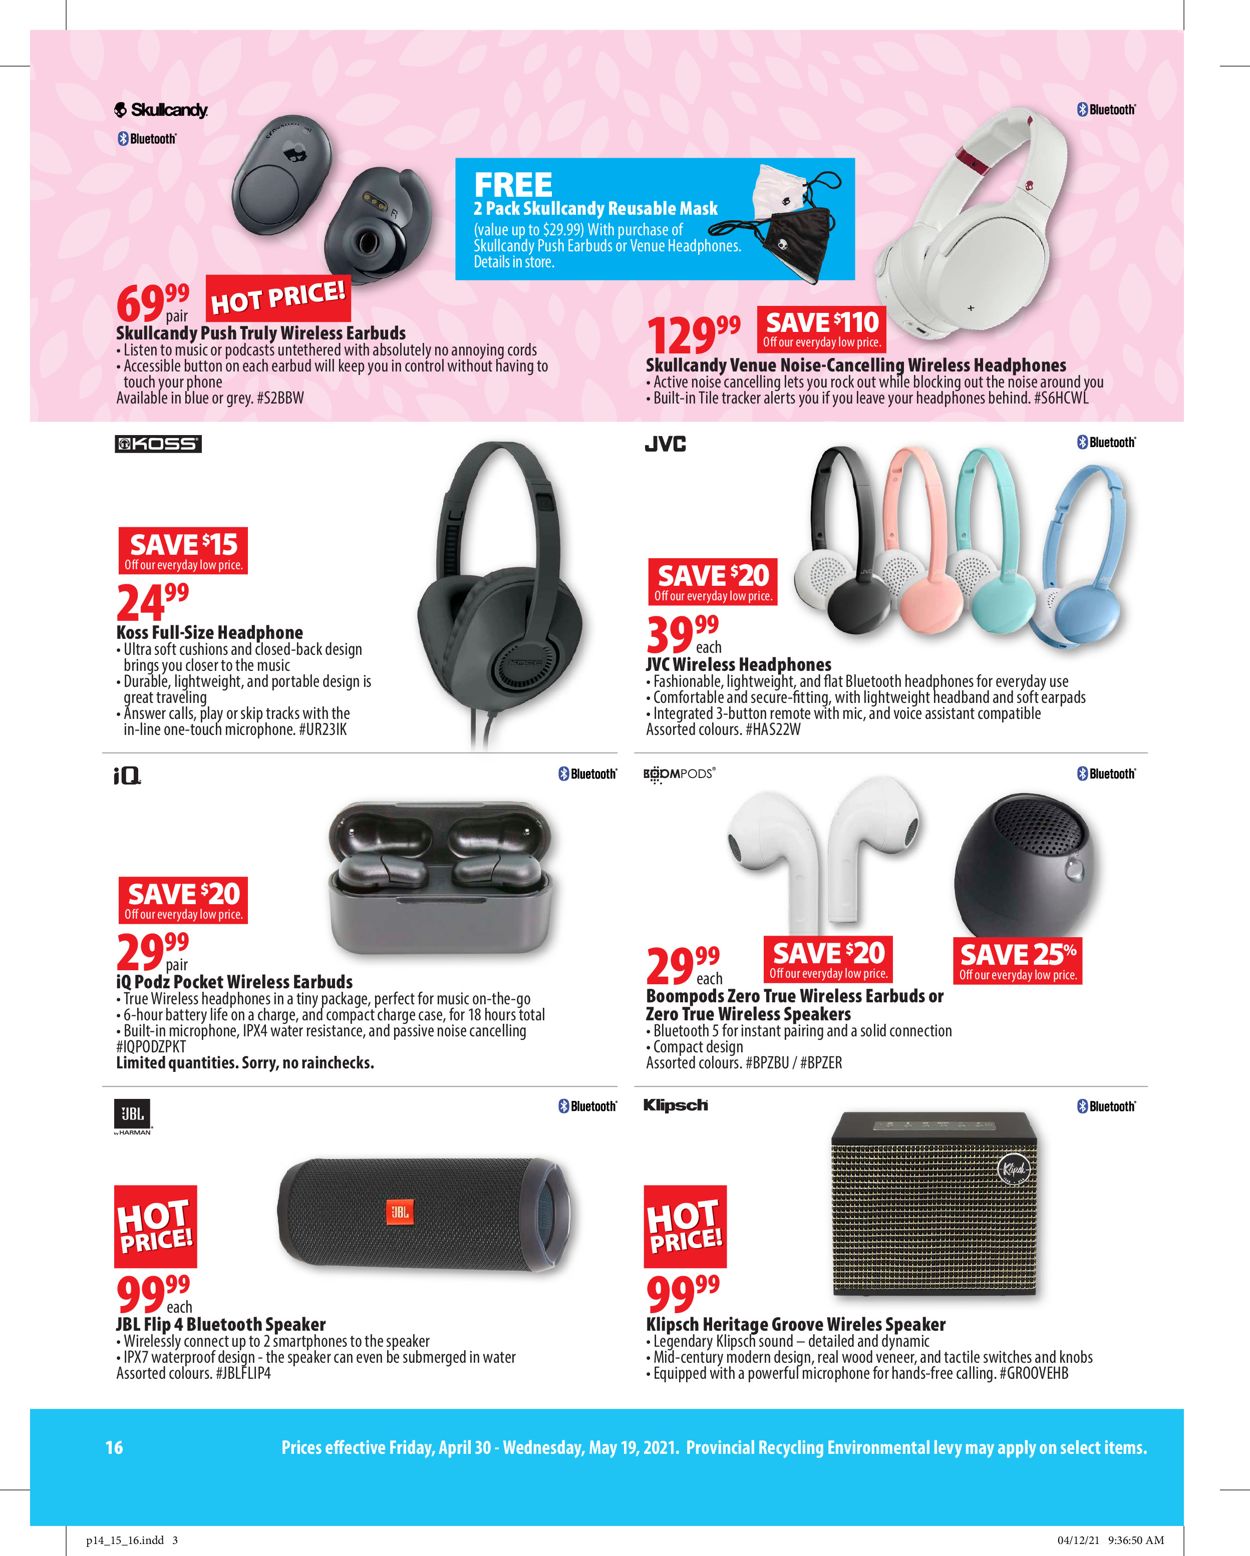 London Drugs Flyer from 04/30/2021